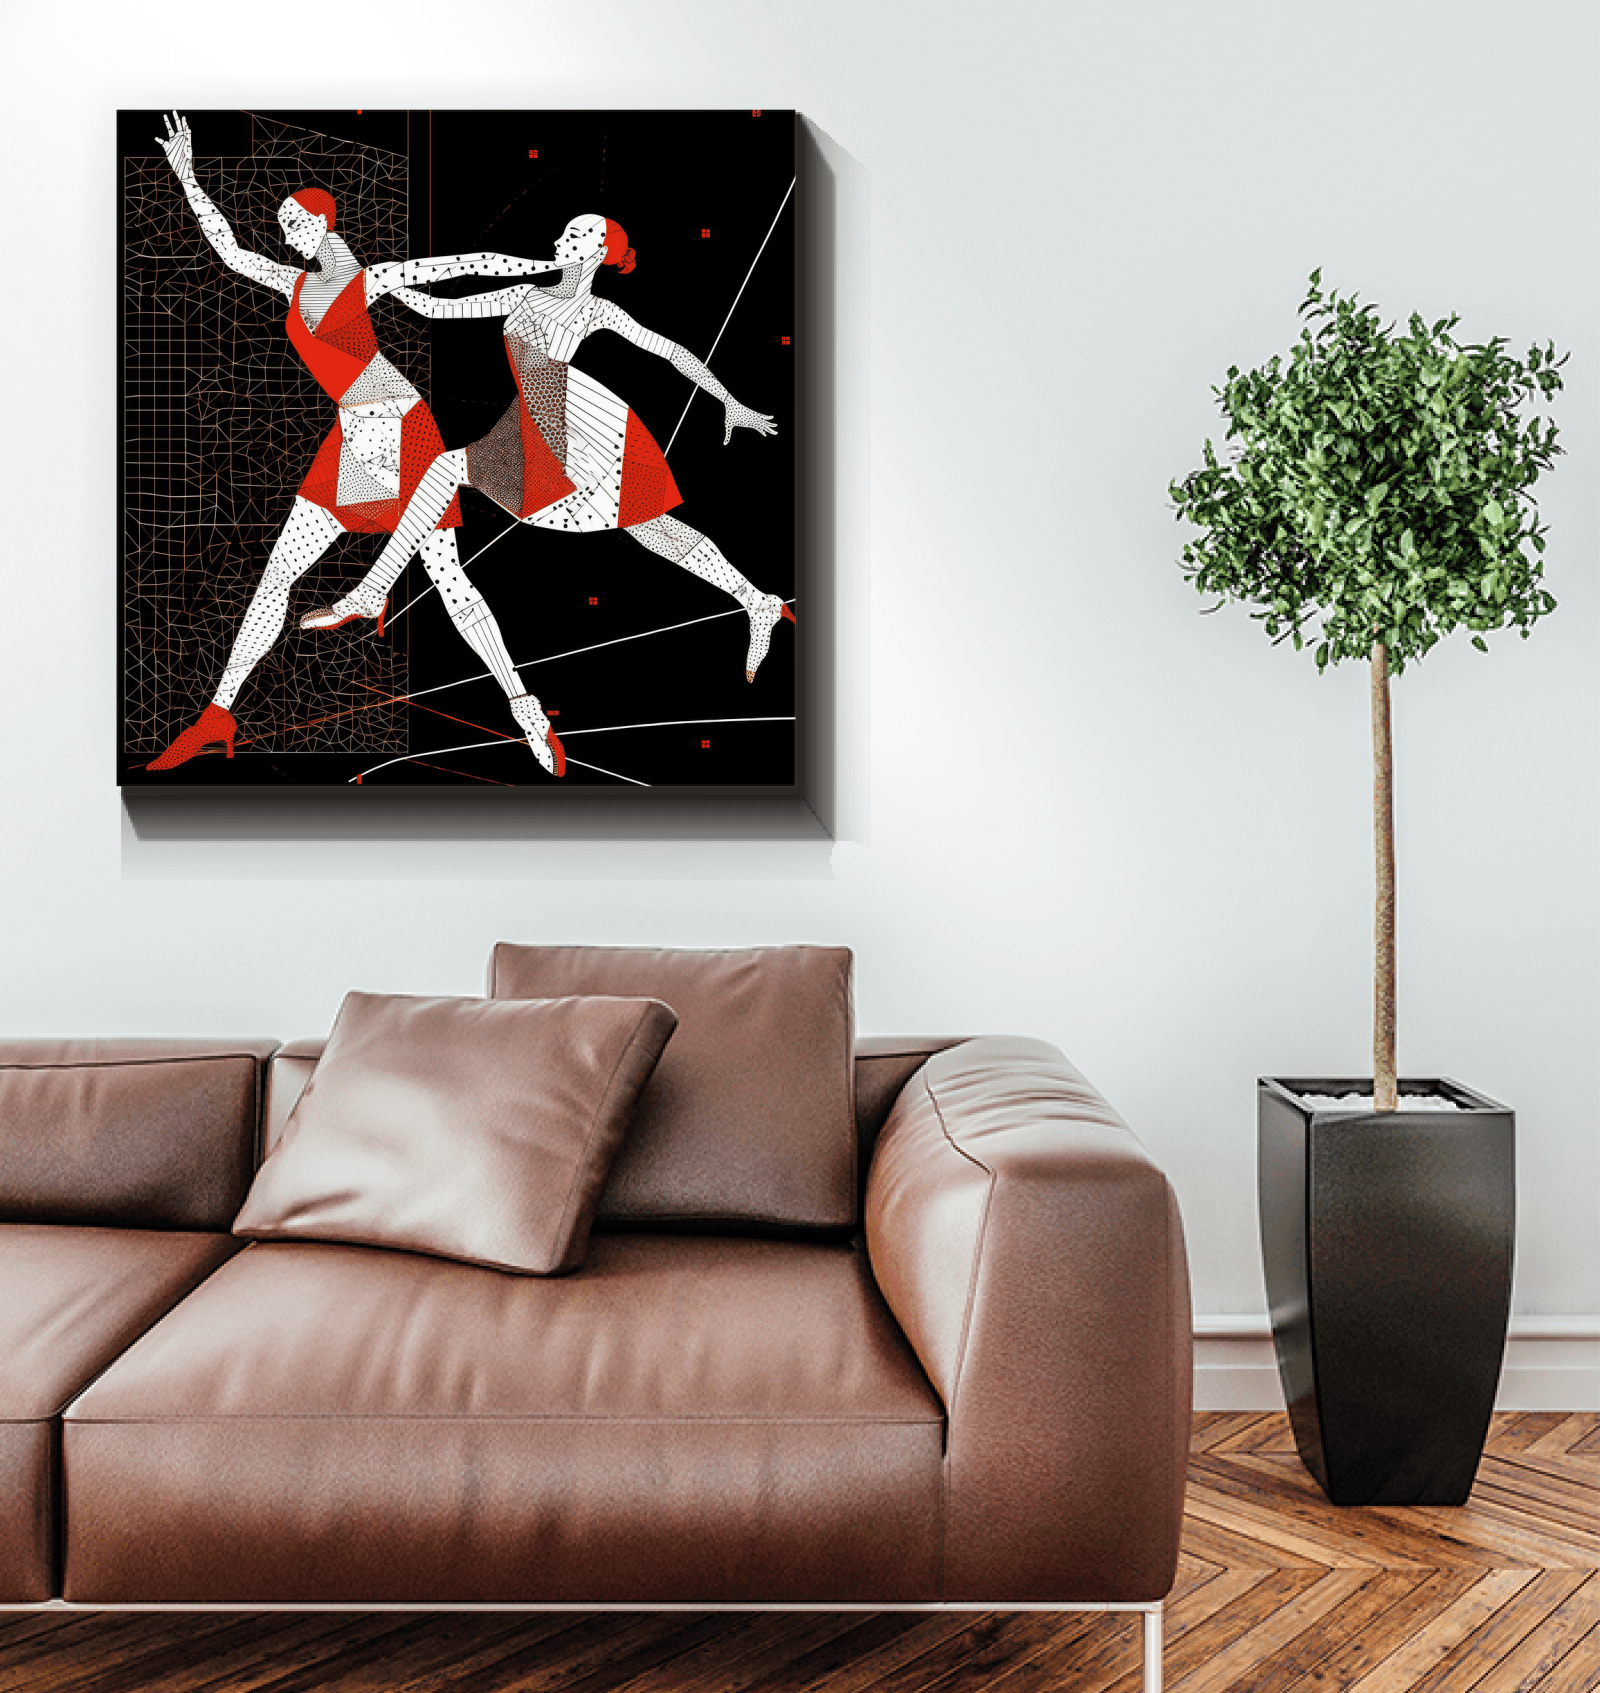 Alluring Feminine Dance Posture Wrapped Canvas - Beyond T-shirts